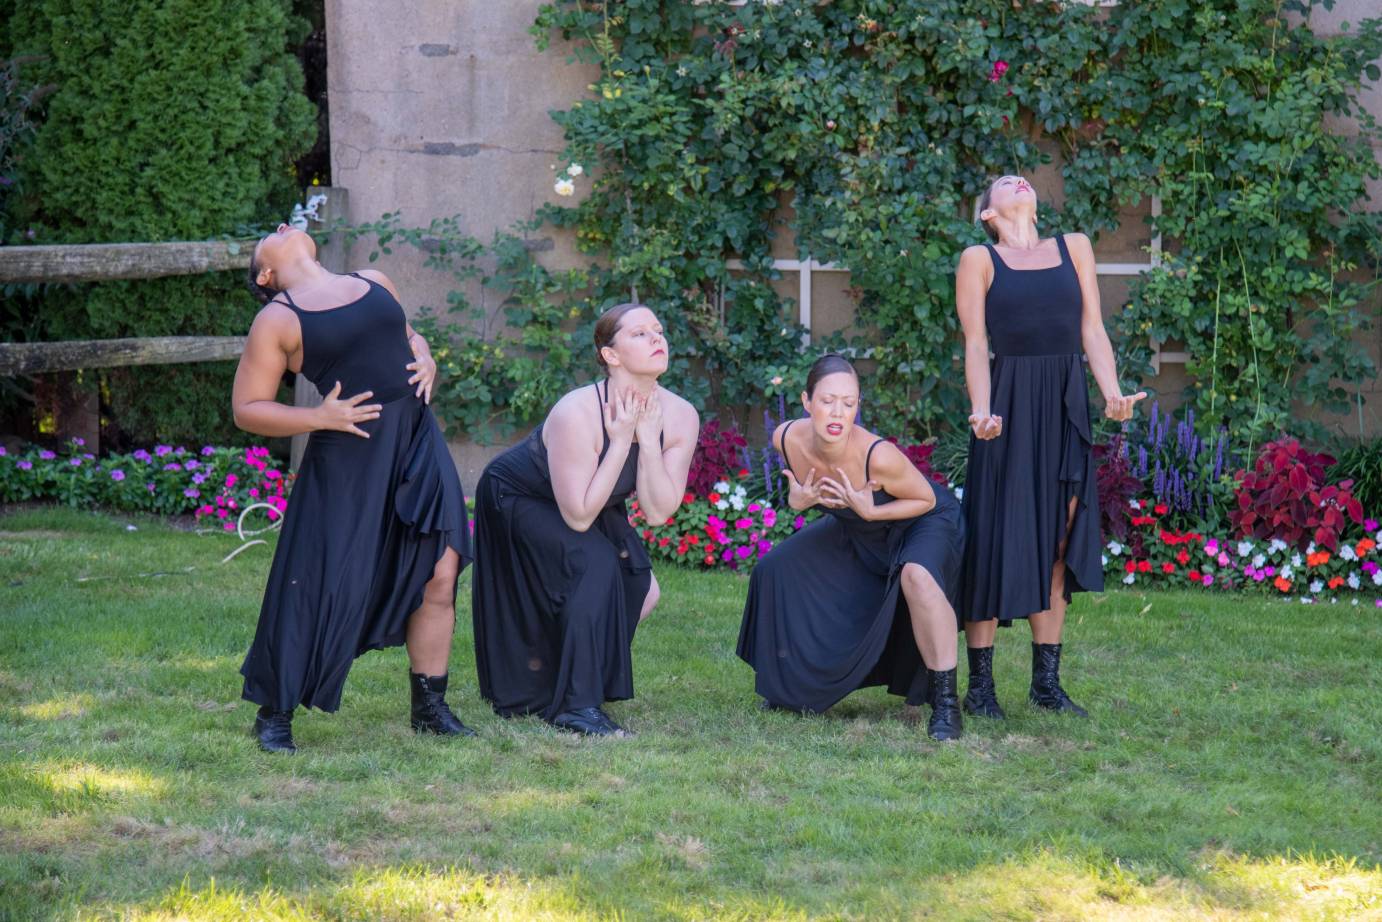 a quartet of women wearing tight black leotards with spagetti straps, black flowing skirst, and black short boots clench fists or clutch at themselves as if experience deep pain. The are in a beautiful garden setting on a green lawn with colorful flowers on the ground and a trellis with roses behind them